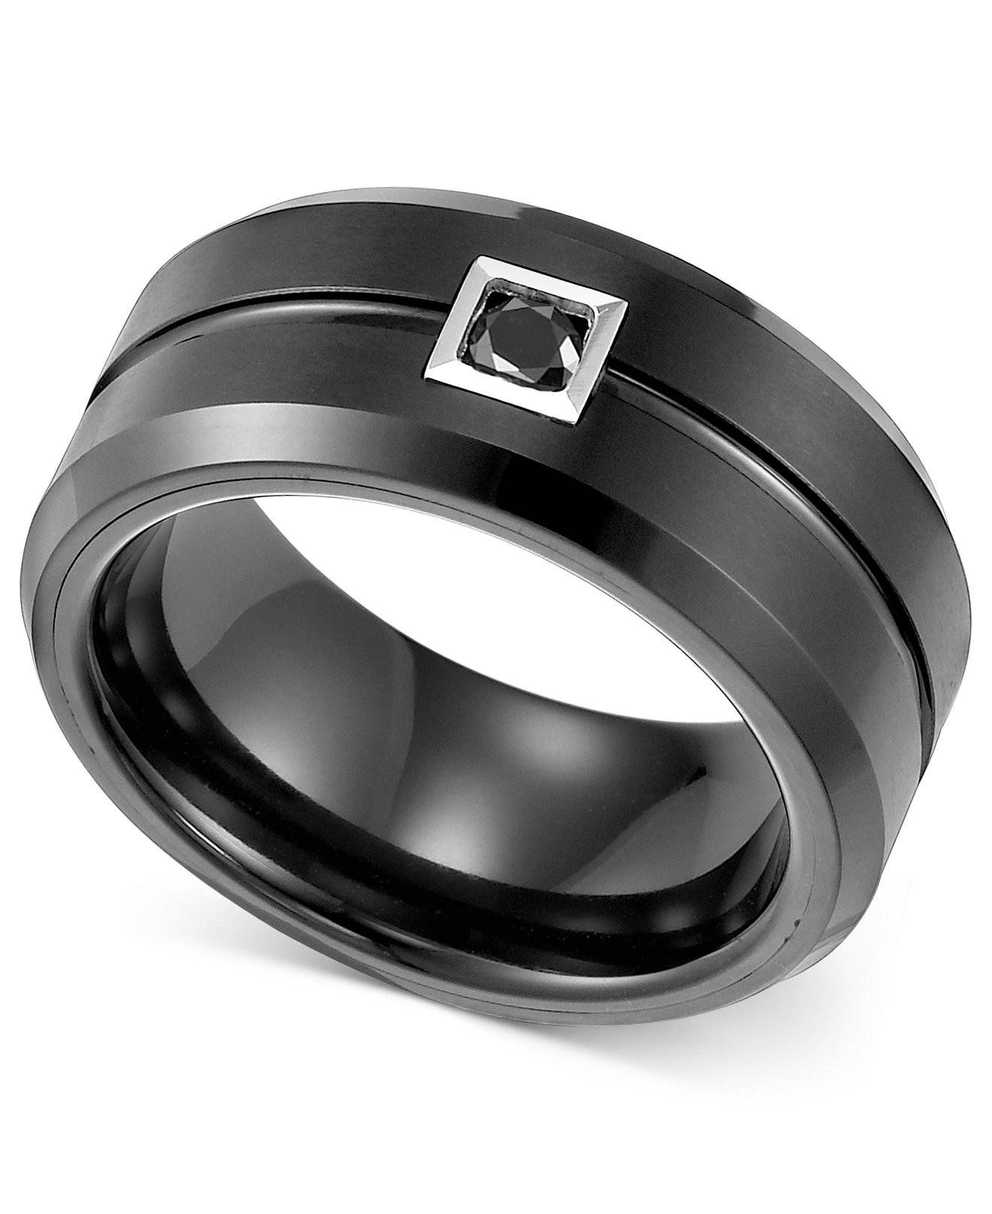 Featured Image of Black Tungsten Wedding Bands With Diamonds